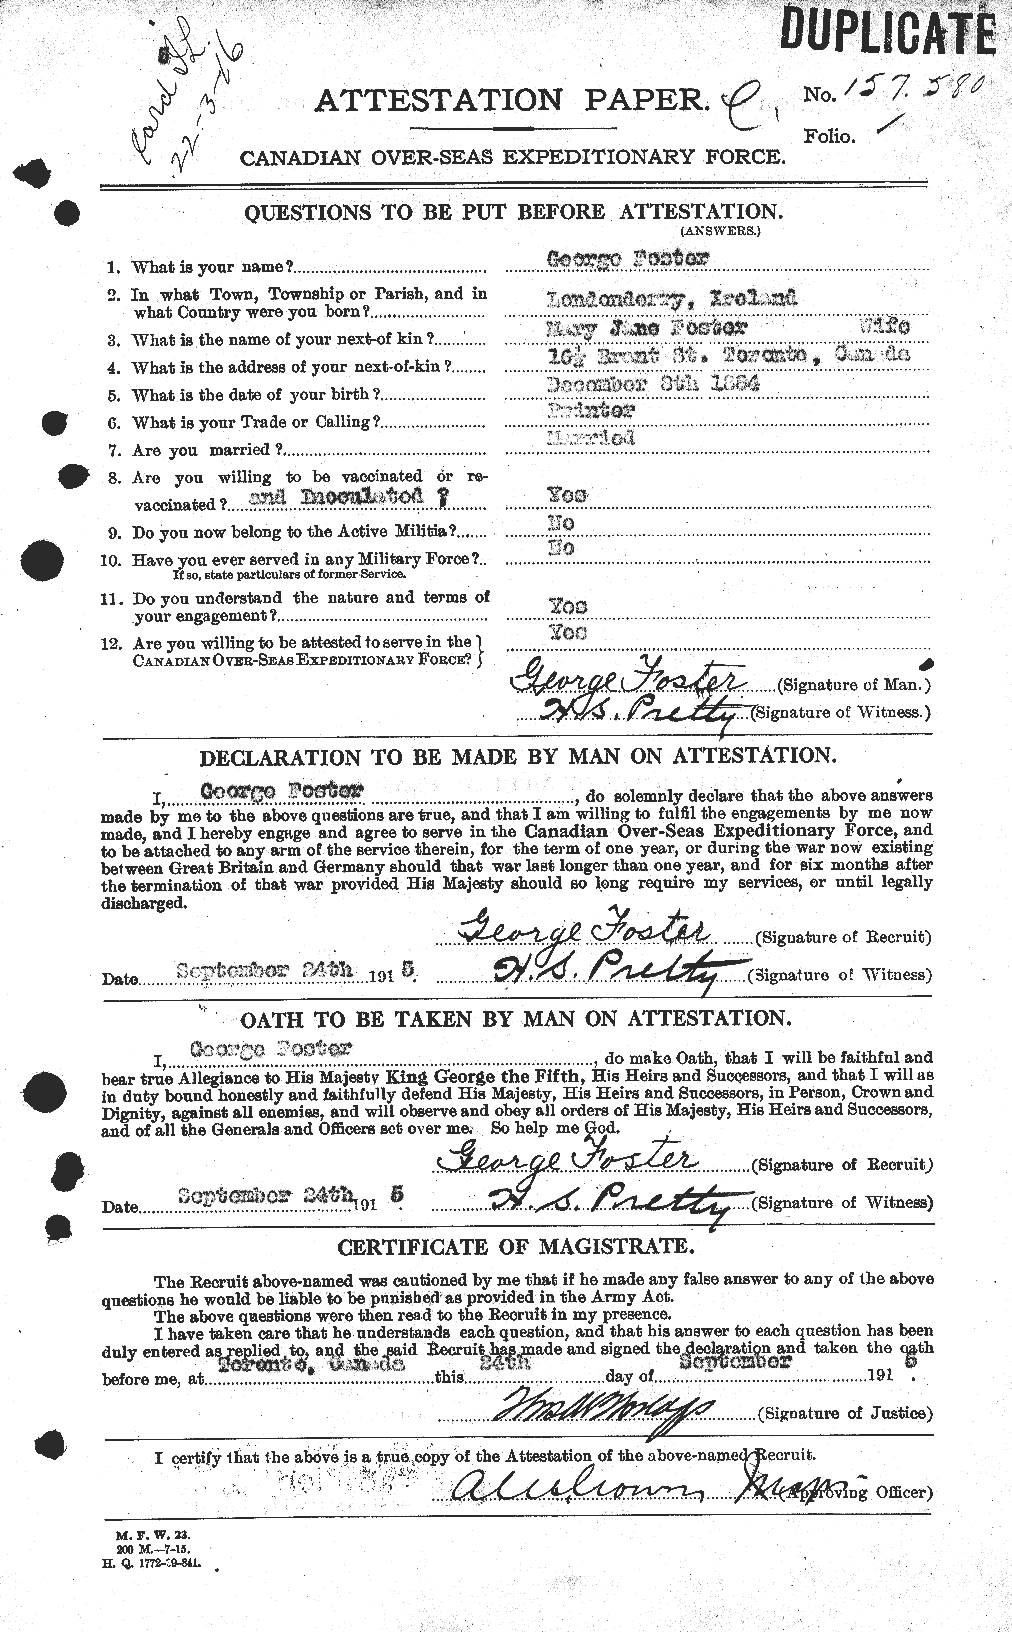 Personnel Records of the First World War - CEF 330669a